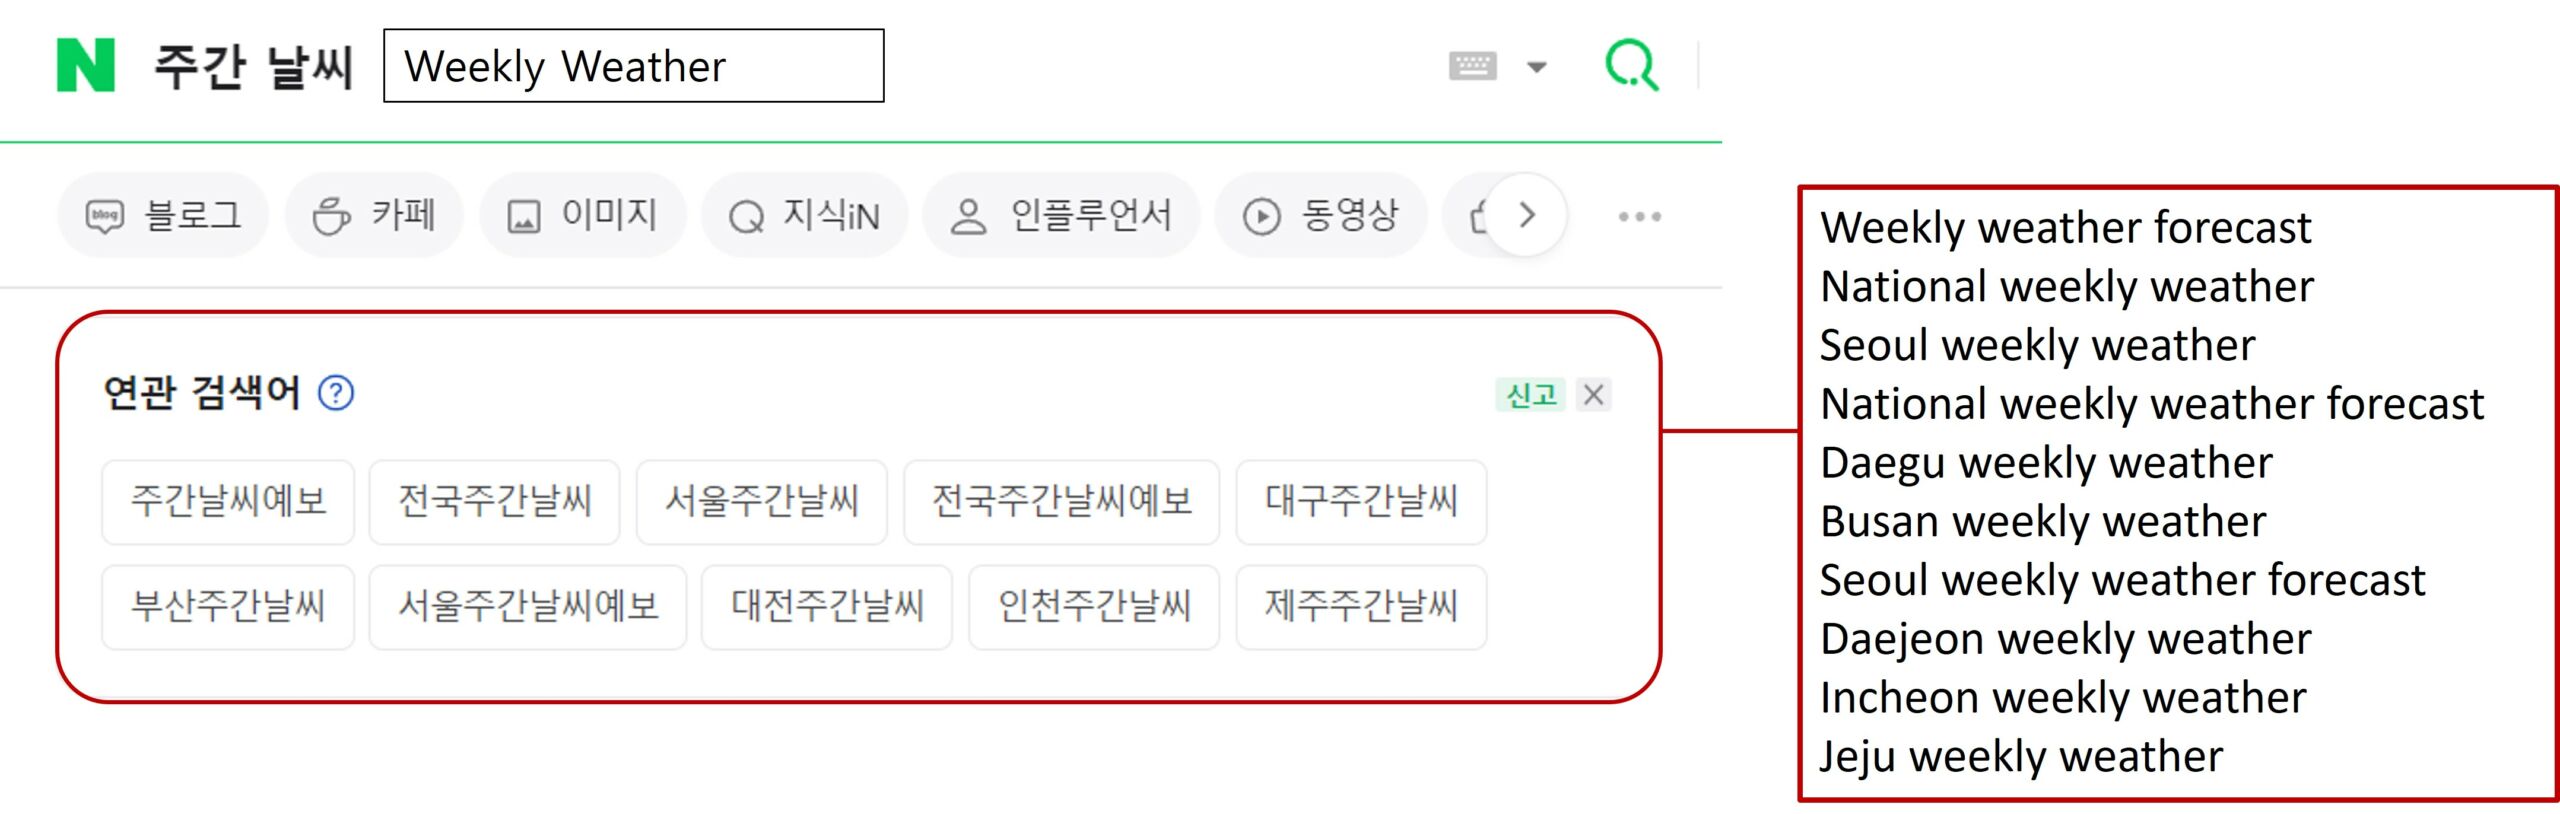 Naver SERP - Related keywords for the search term Weekly Weather